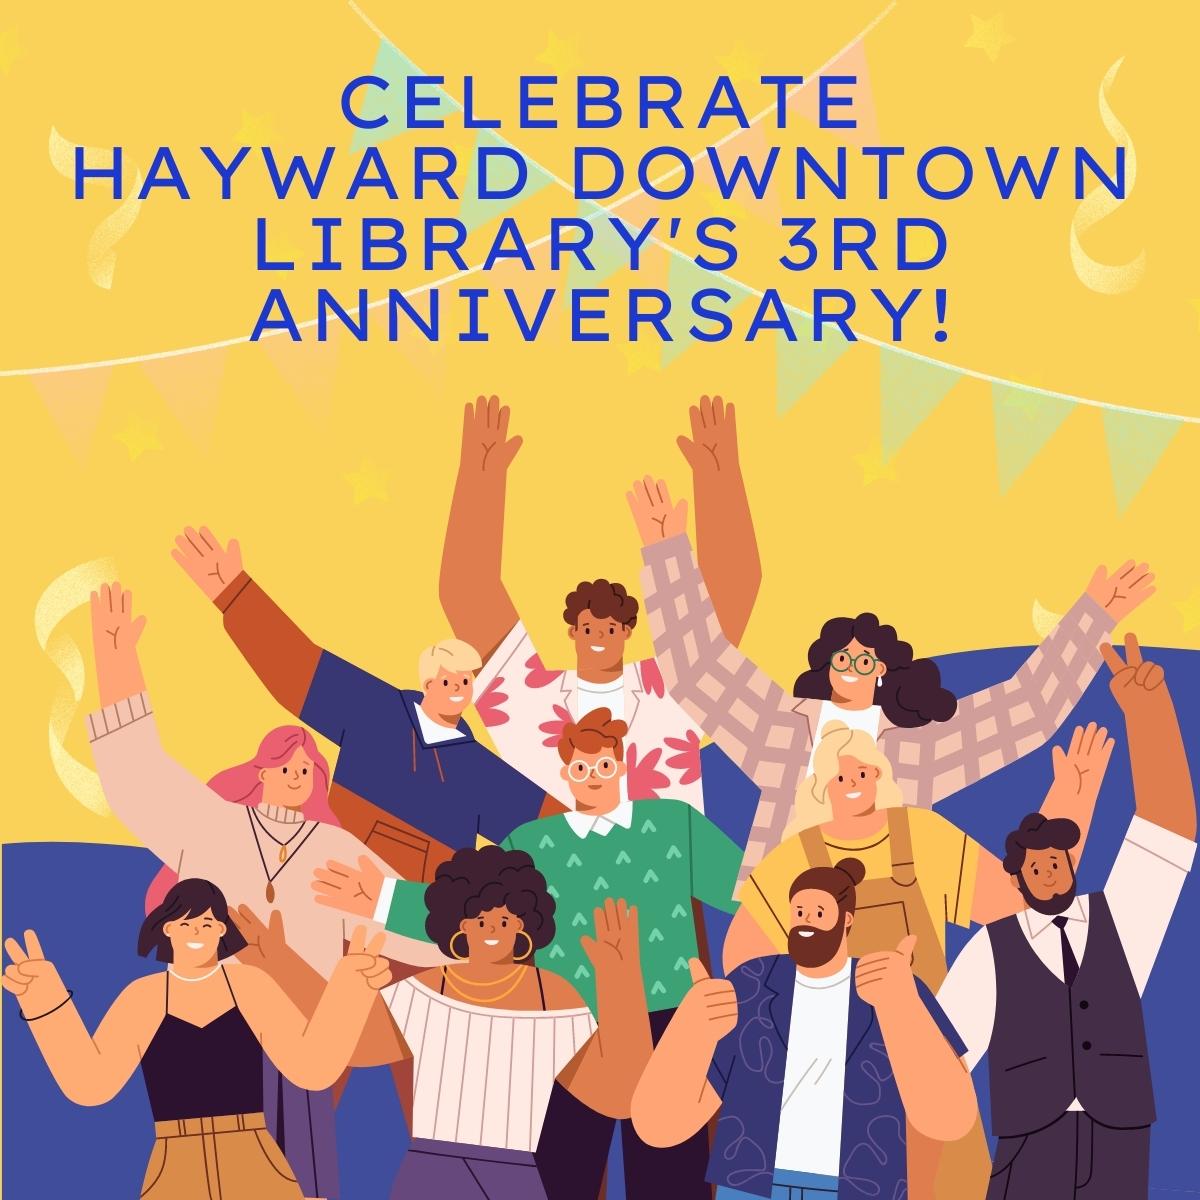 Celebrate Hayward Downtown Library's Third Annivesary!